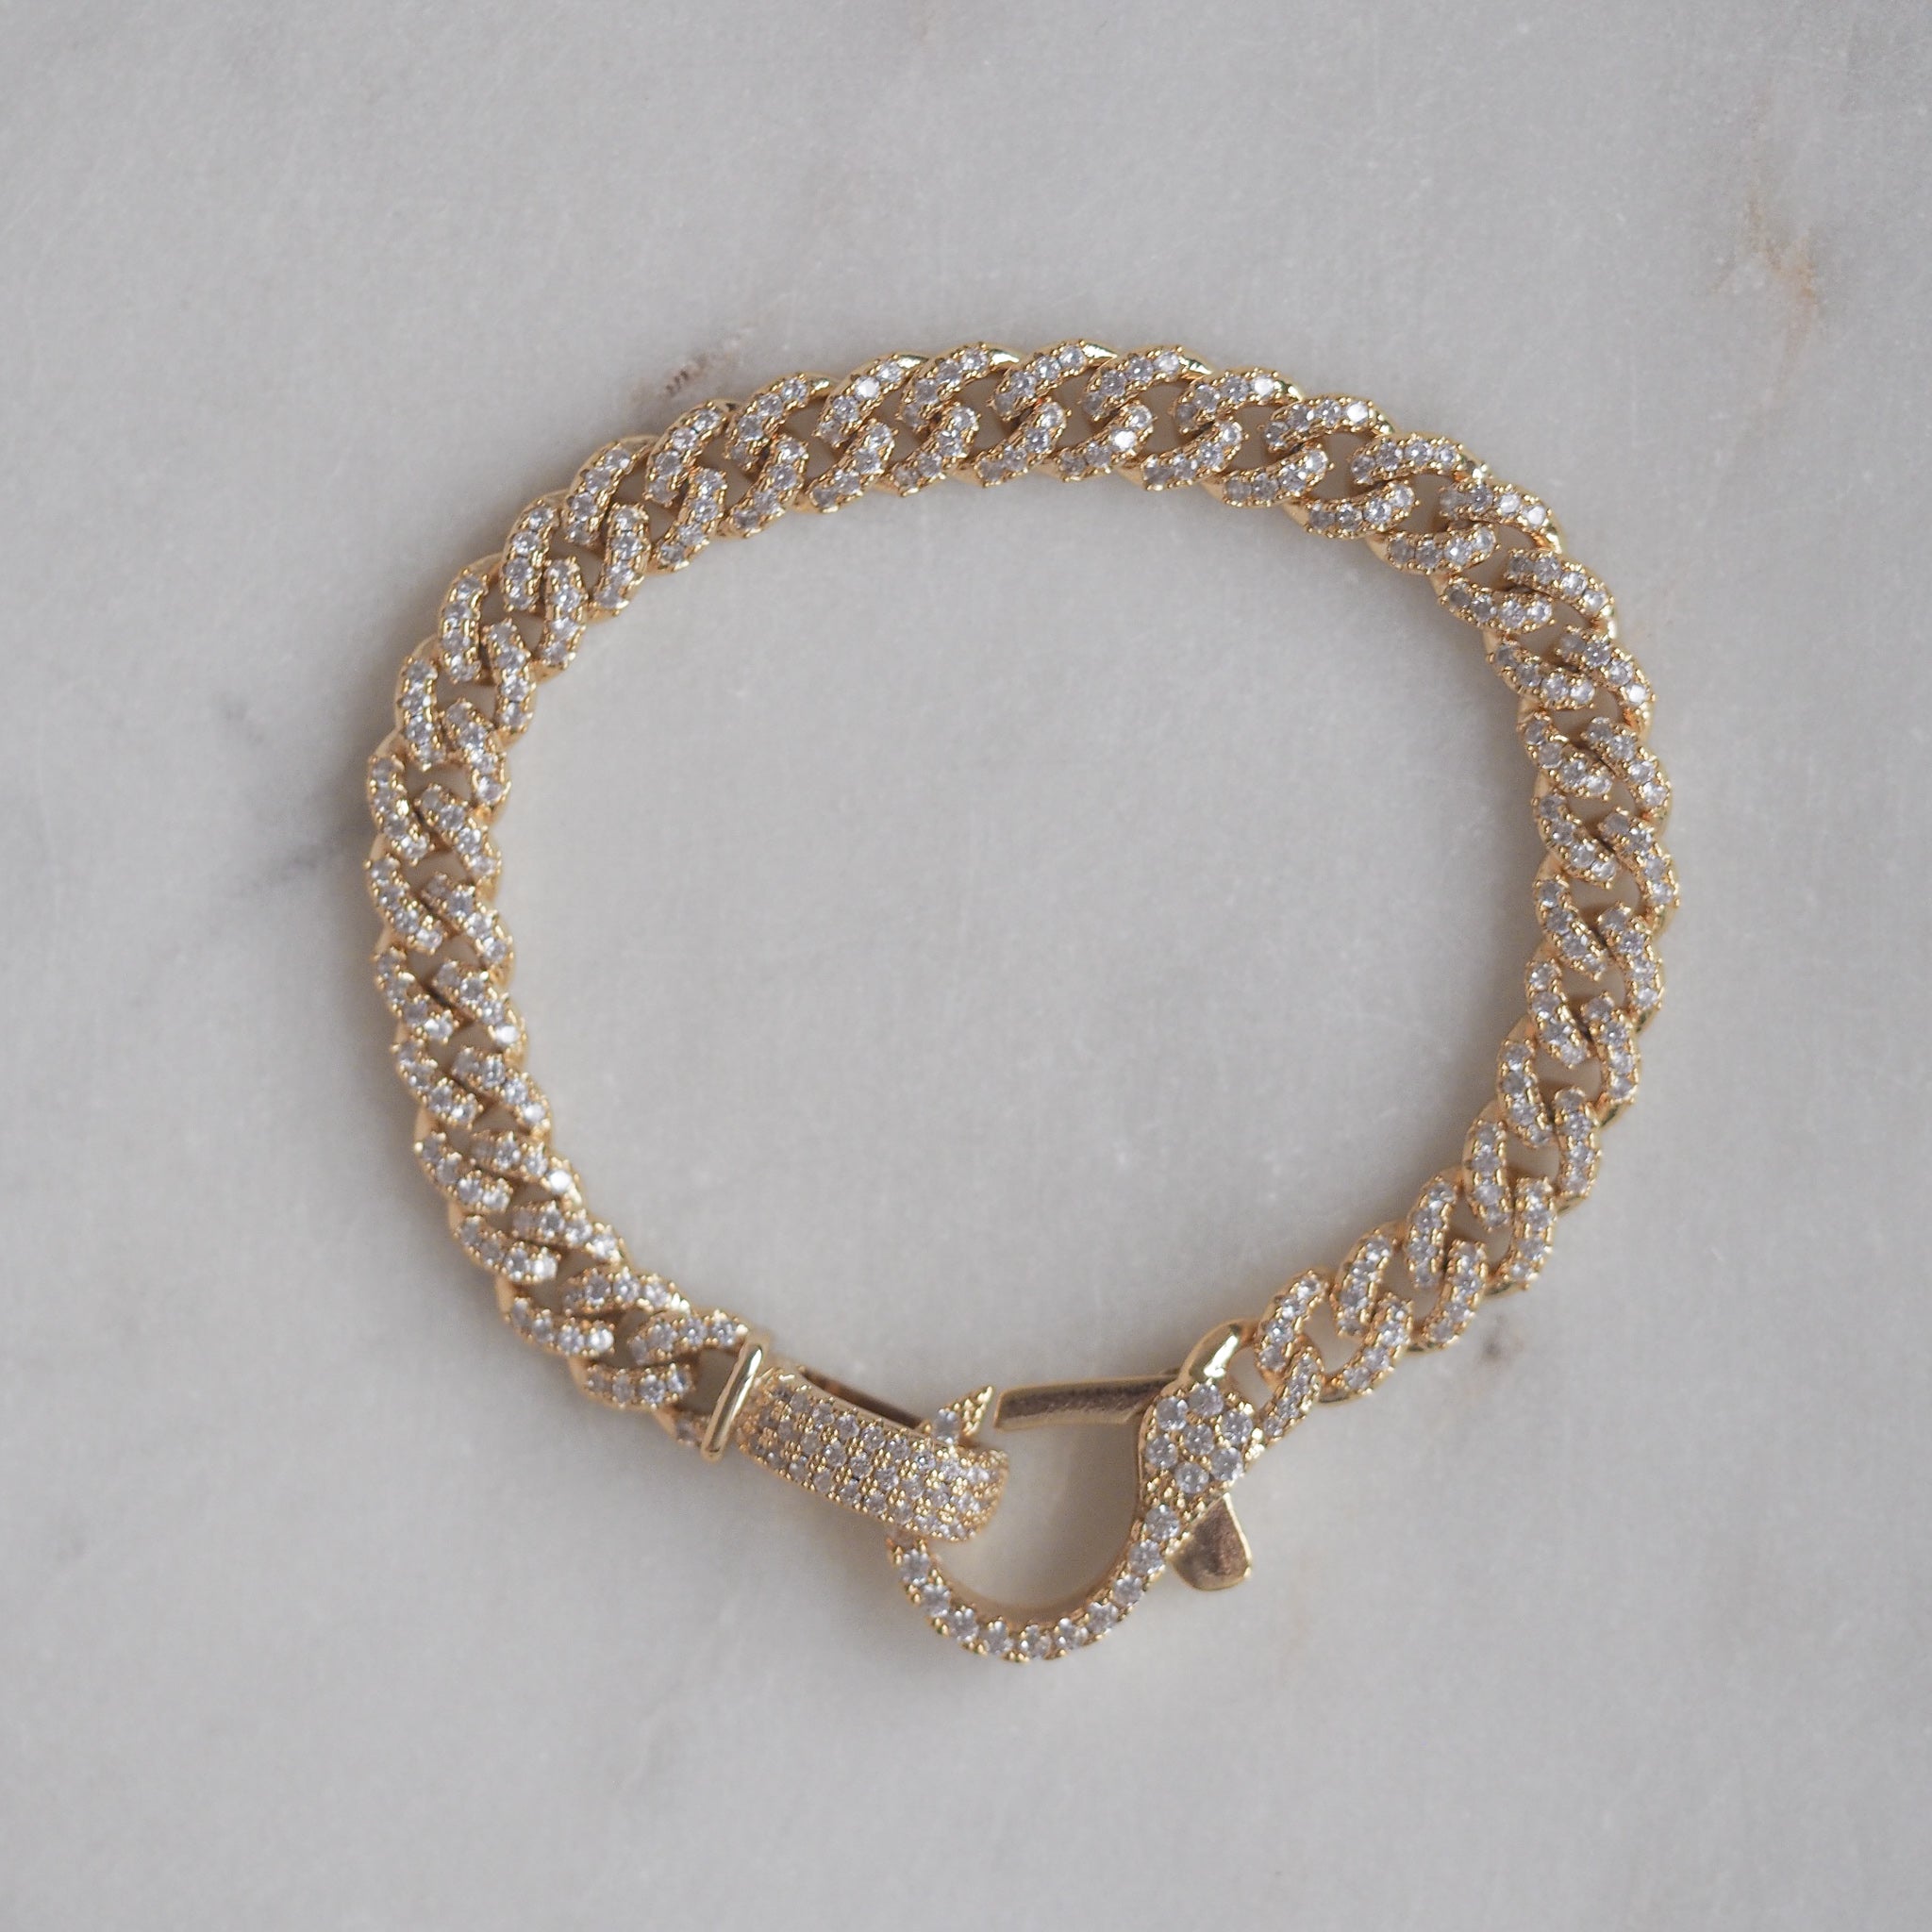 Harlow Pave Curb Chain Bracelet - Gold